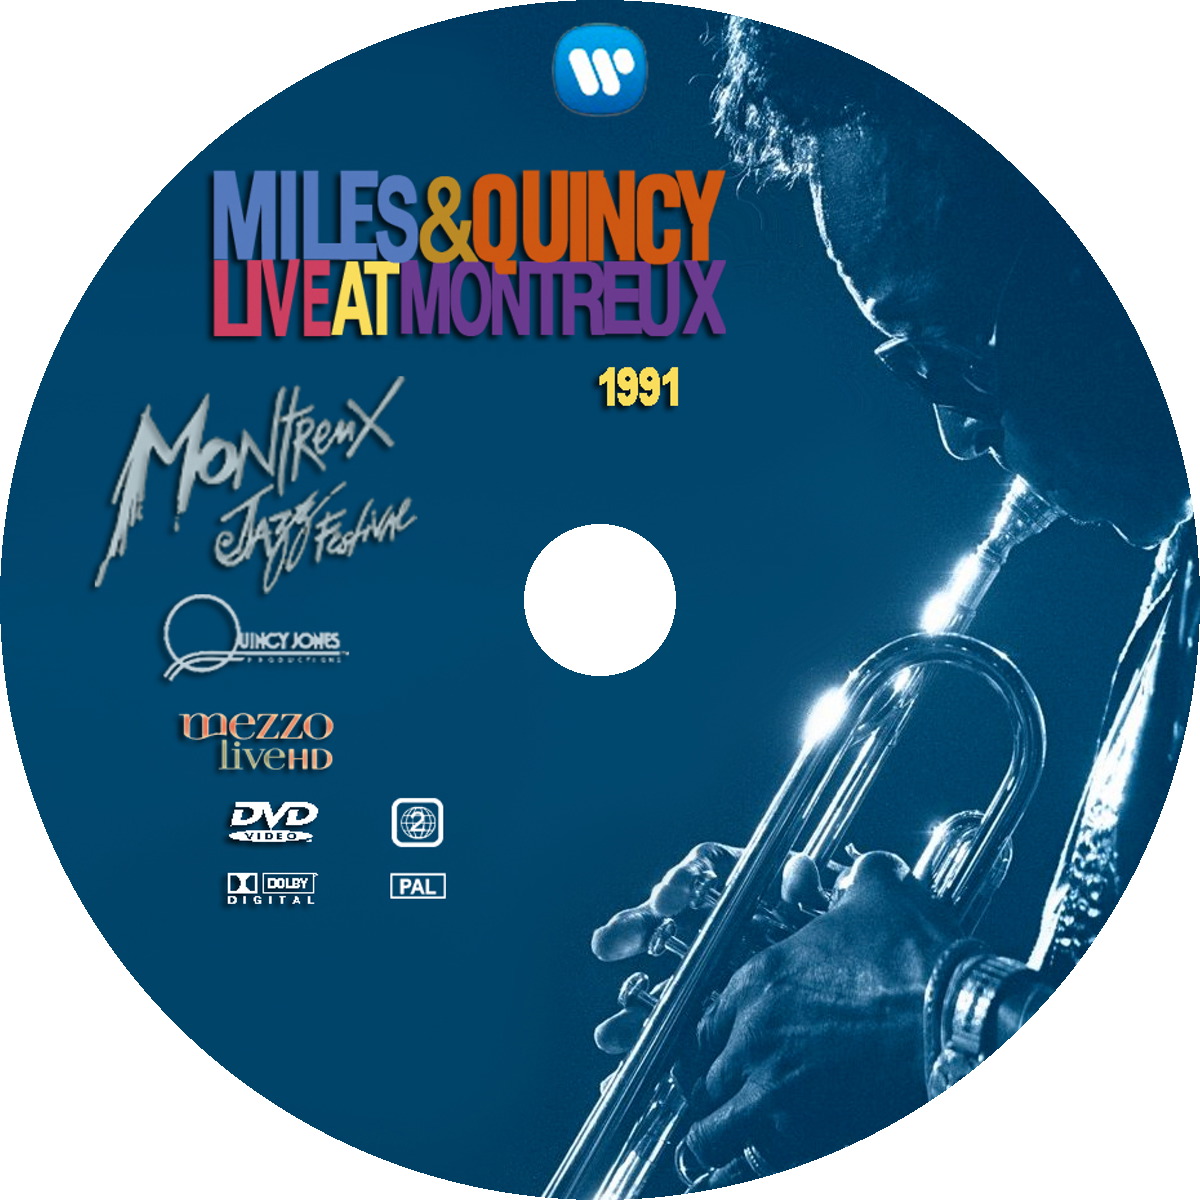 Miles & Quincy live at Montreux custom